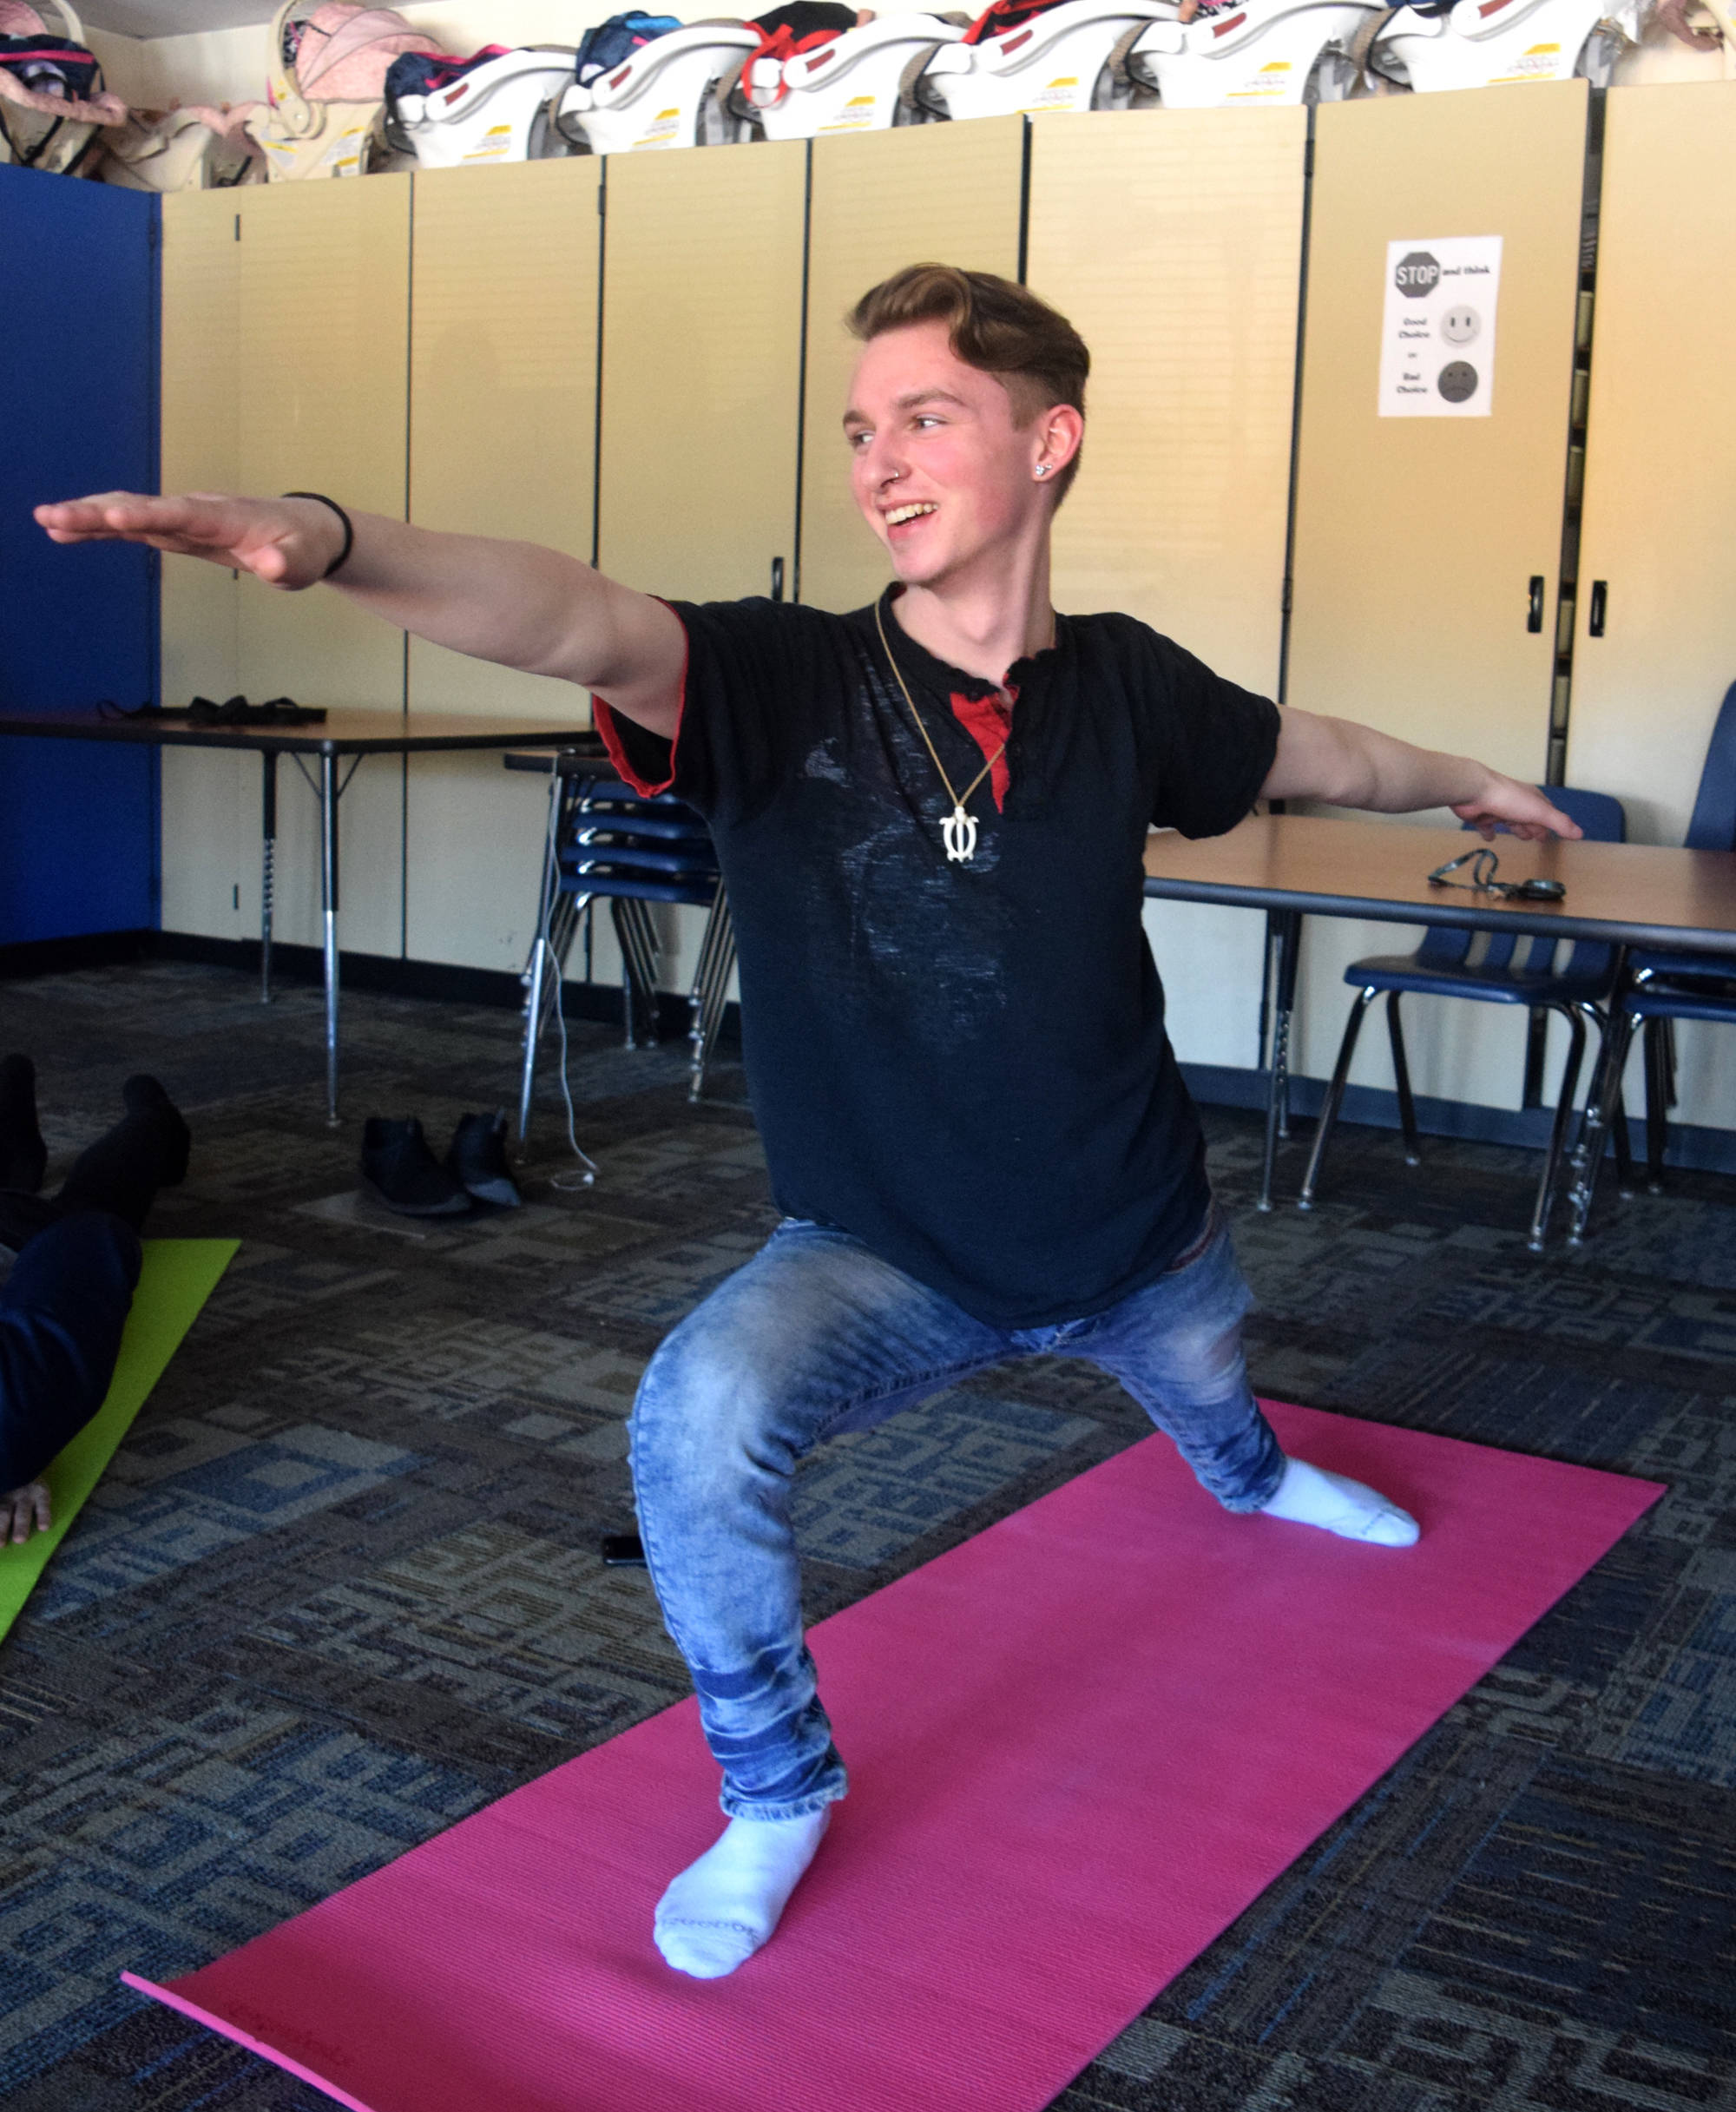 Cody Little practices yoga during the Focus on Learning class period at Soldotna High School on Friday. (Photo by Kat Sorensen/Peninsula Clarion)